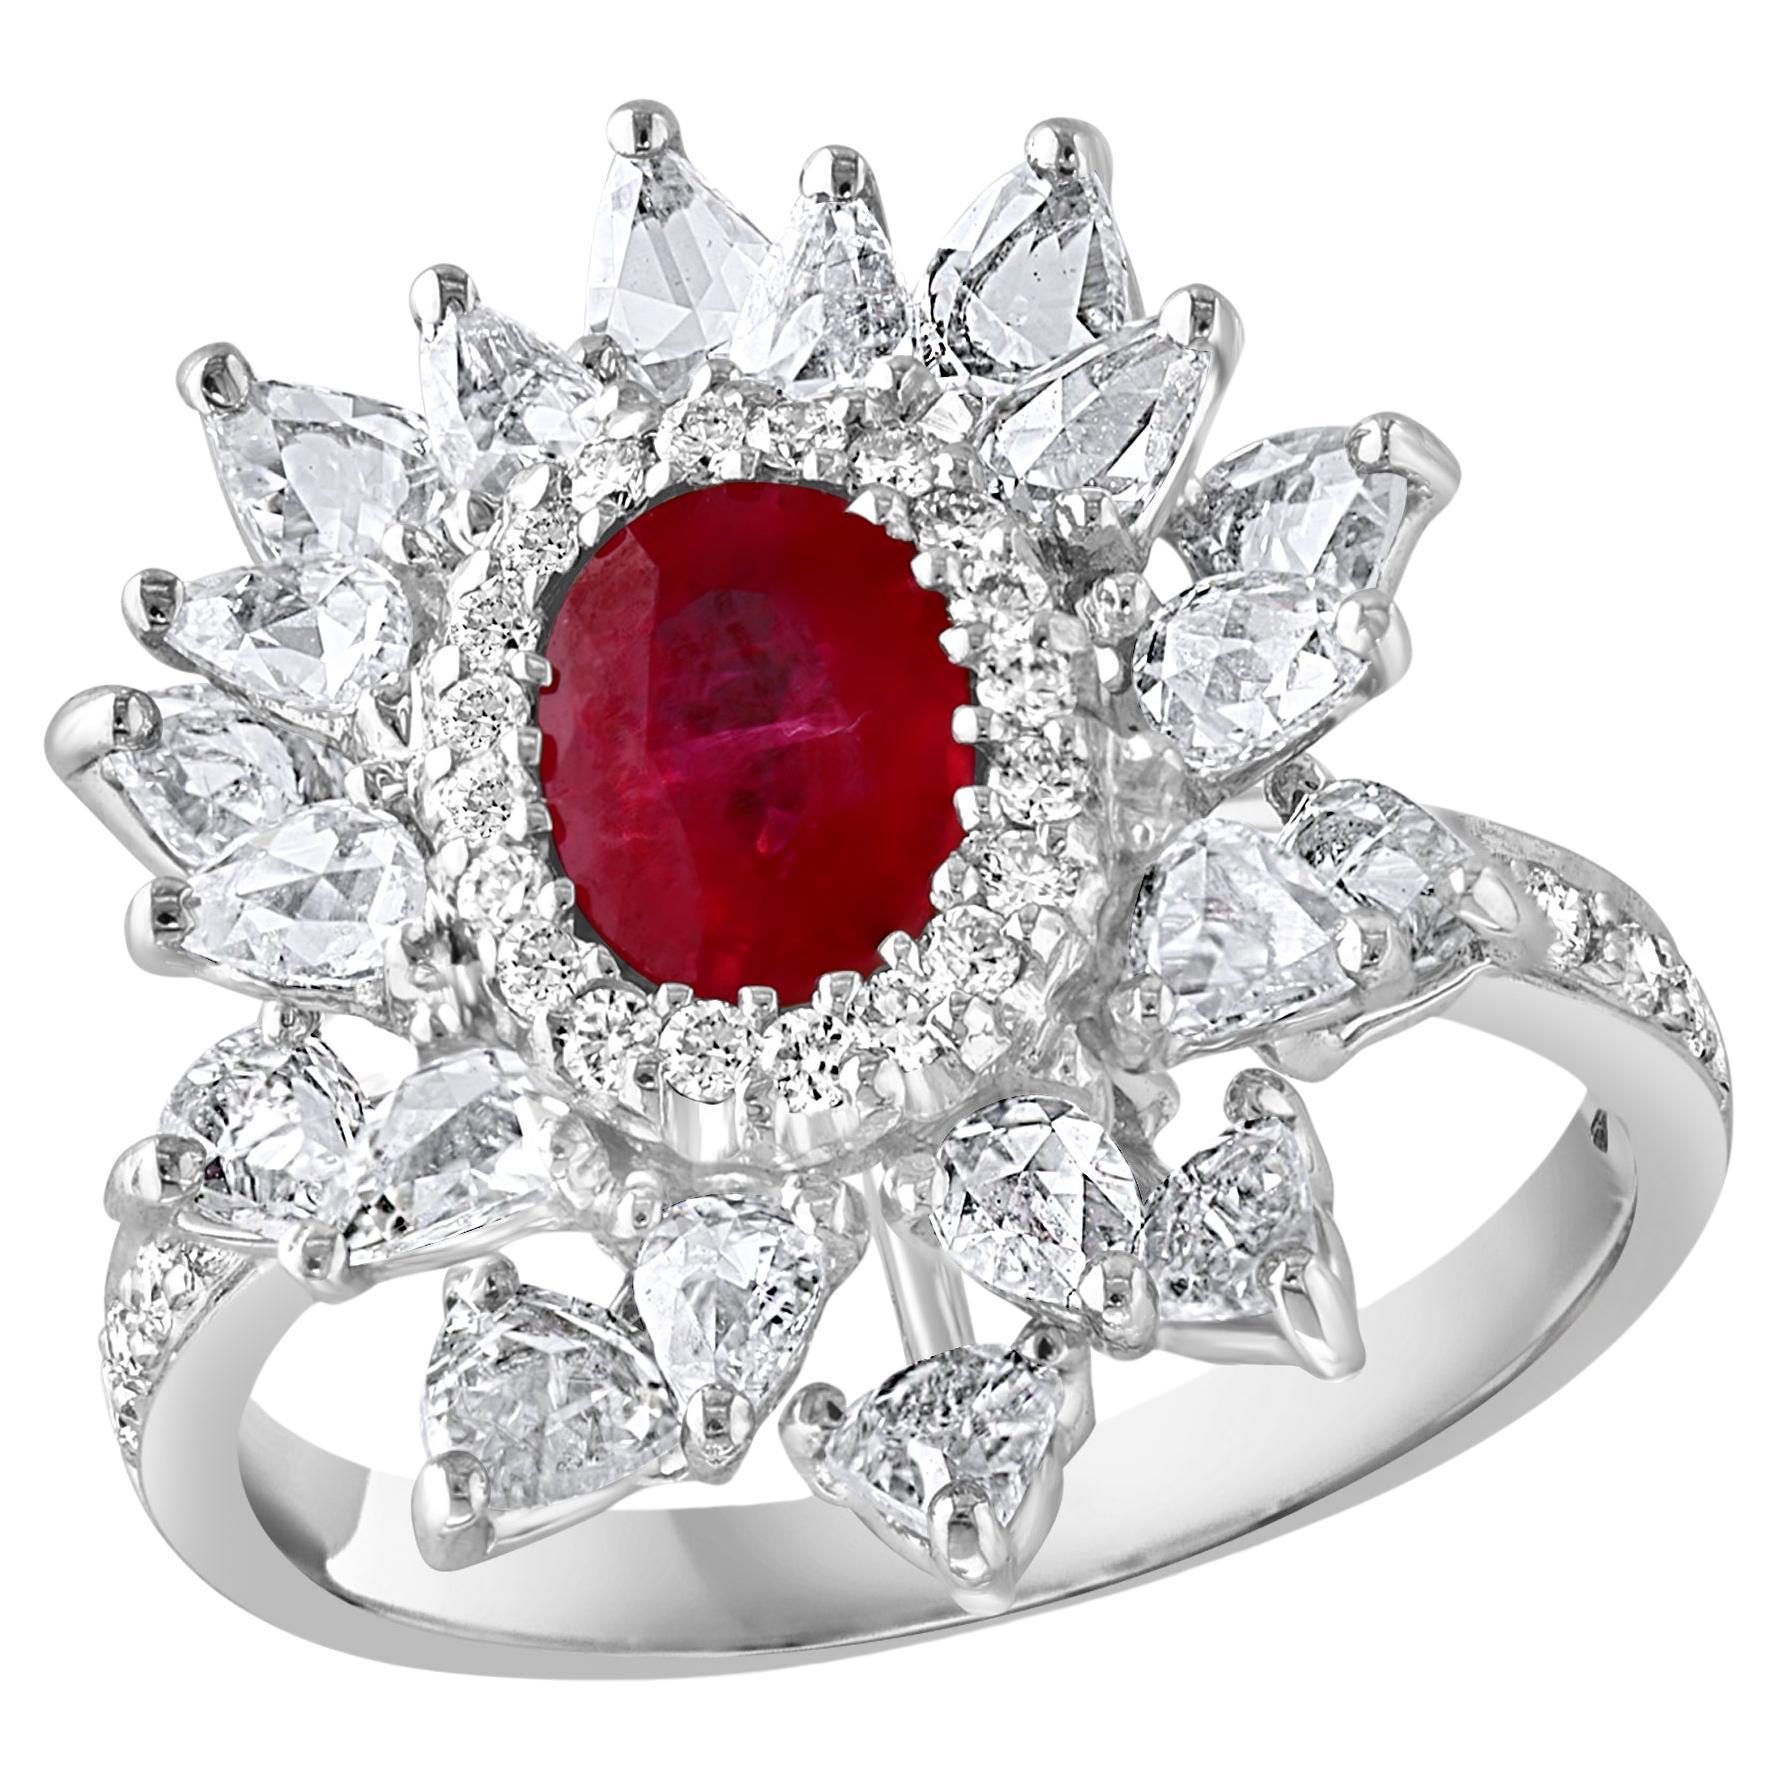 1.1 Carat Natural Oval  Ruby and 2 Carat Diamond 18 Karat White Gold Ring S 6.75 For Sale